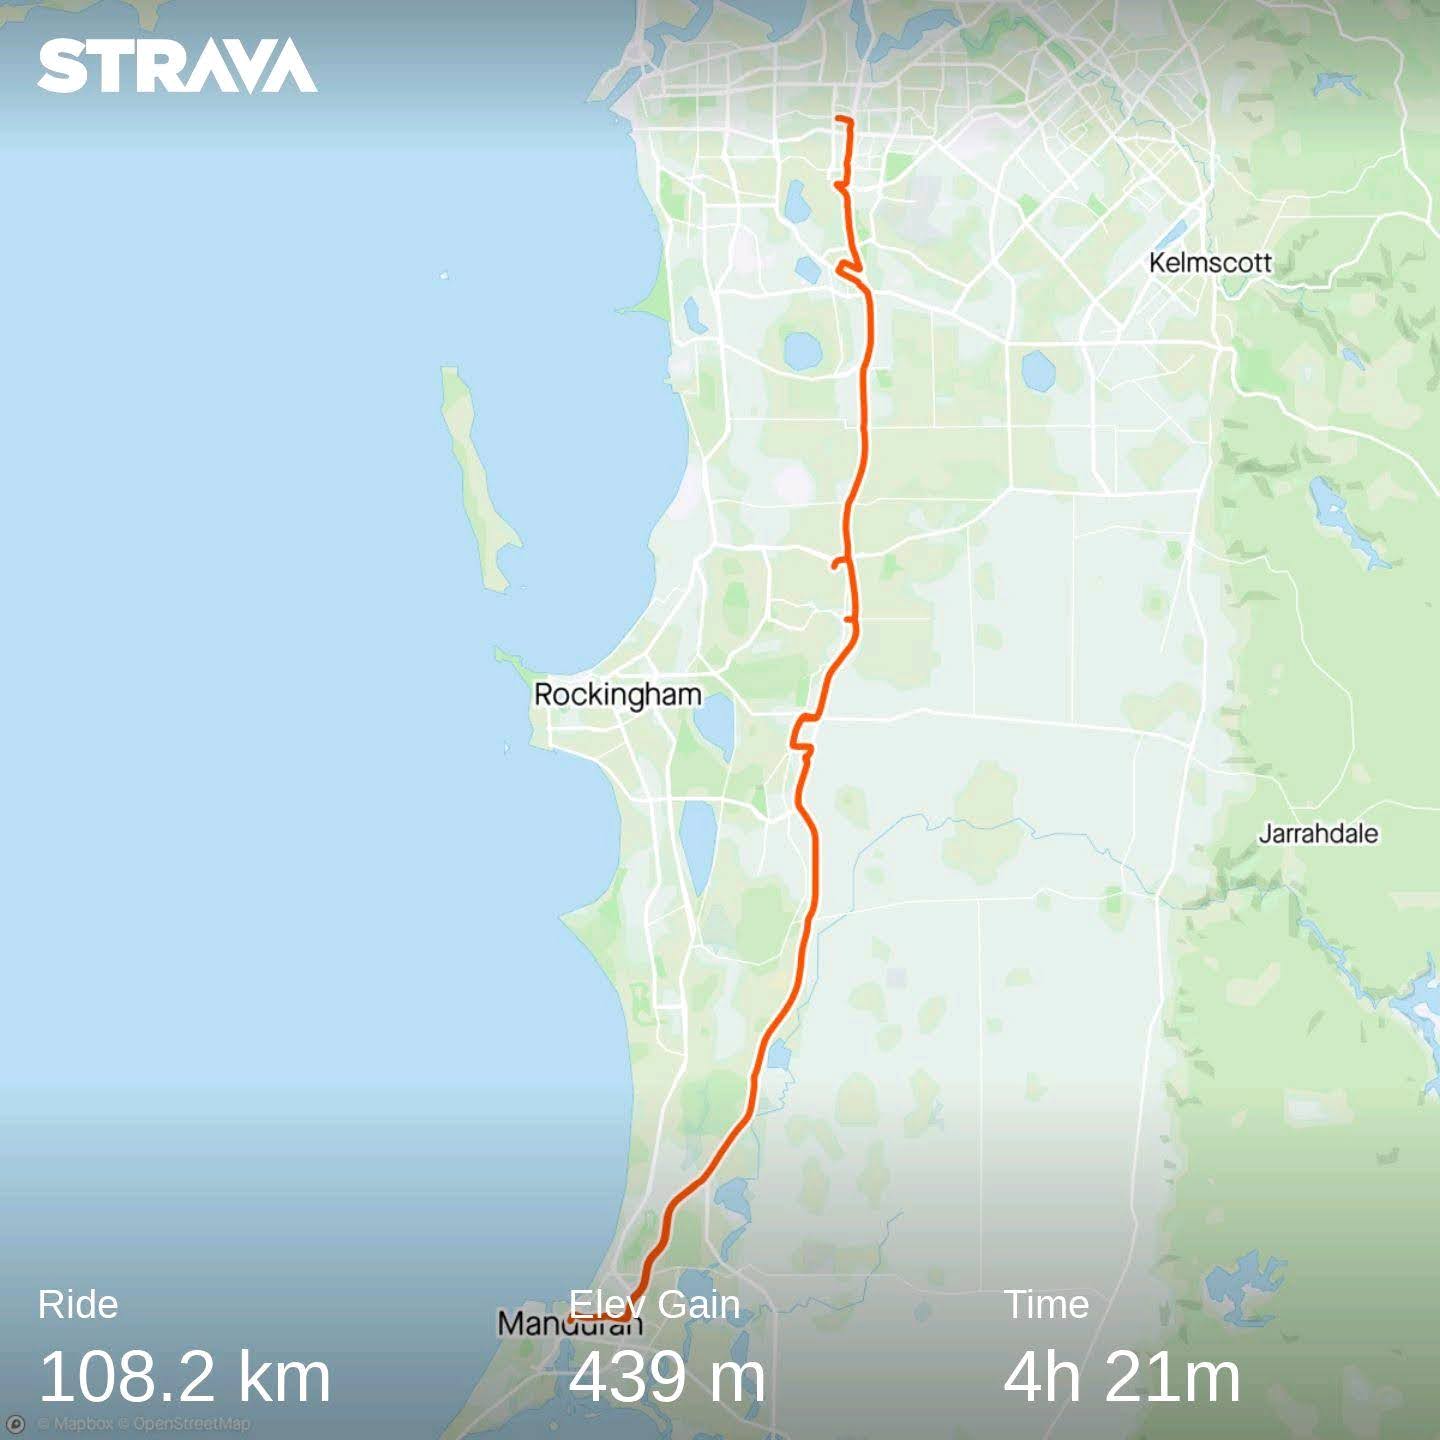 Strava Map of the Century Ride from start to Mandurah to Kwinana Station. Does not include last section from Murdoch station back to start.